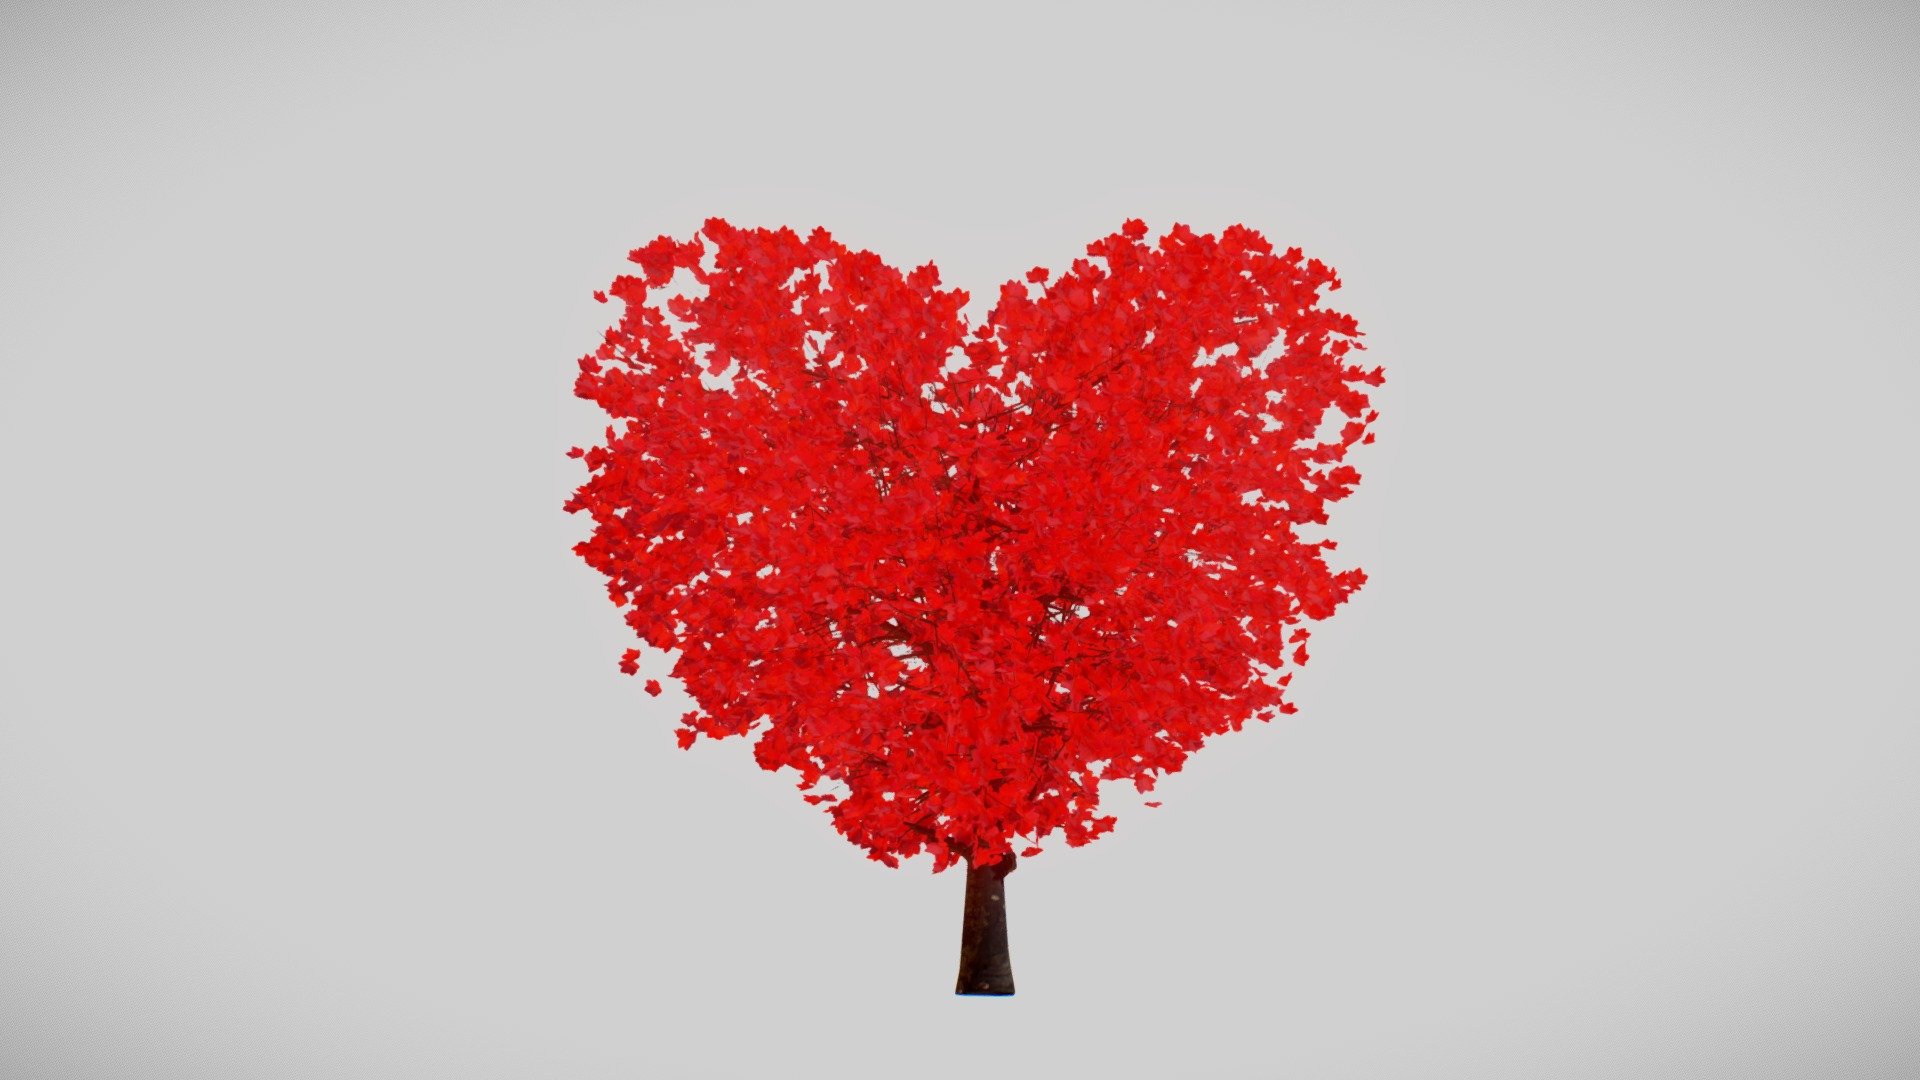 SketchfabWeeklyChallenge
valentines day special Heart shaped tree

Made to use in game engine.
Mid poly optimized with 2k textures 3d model